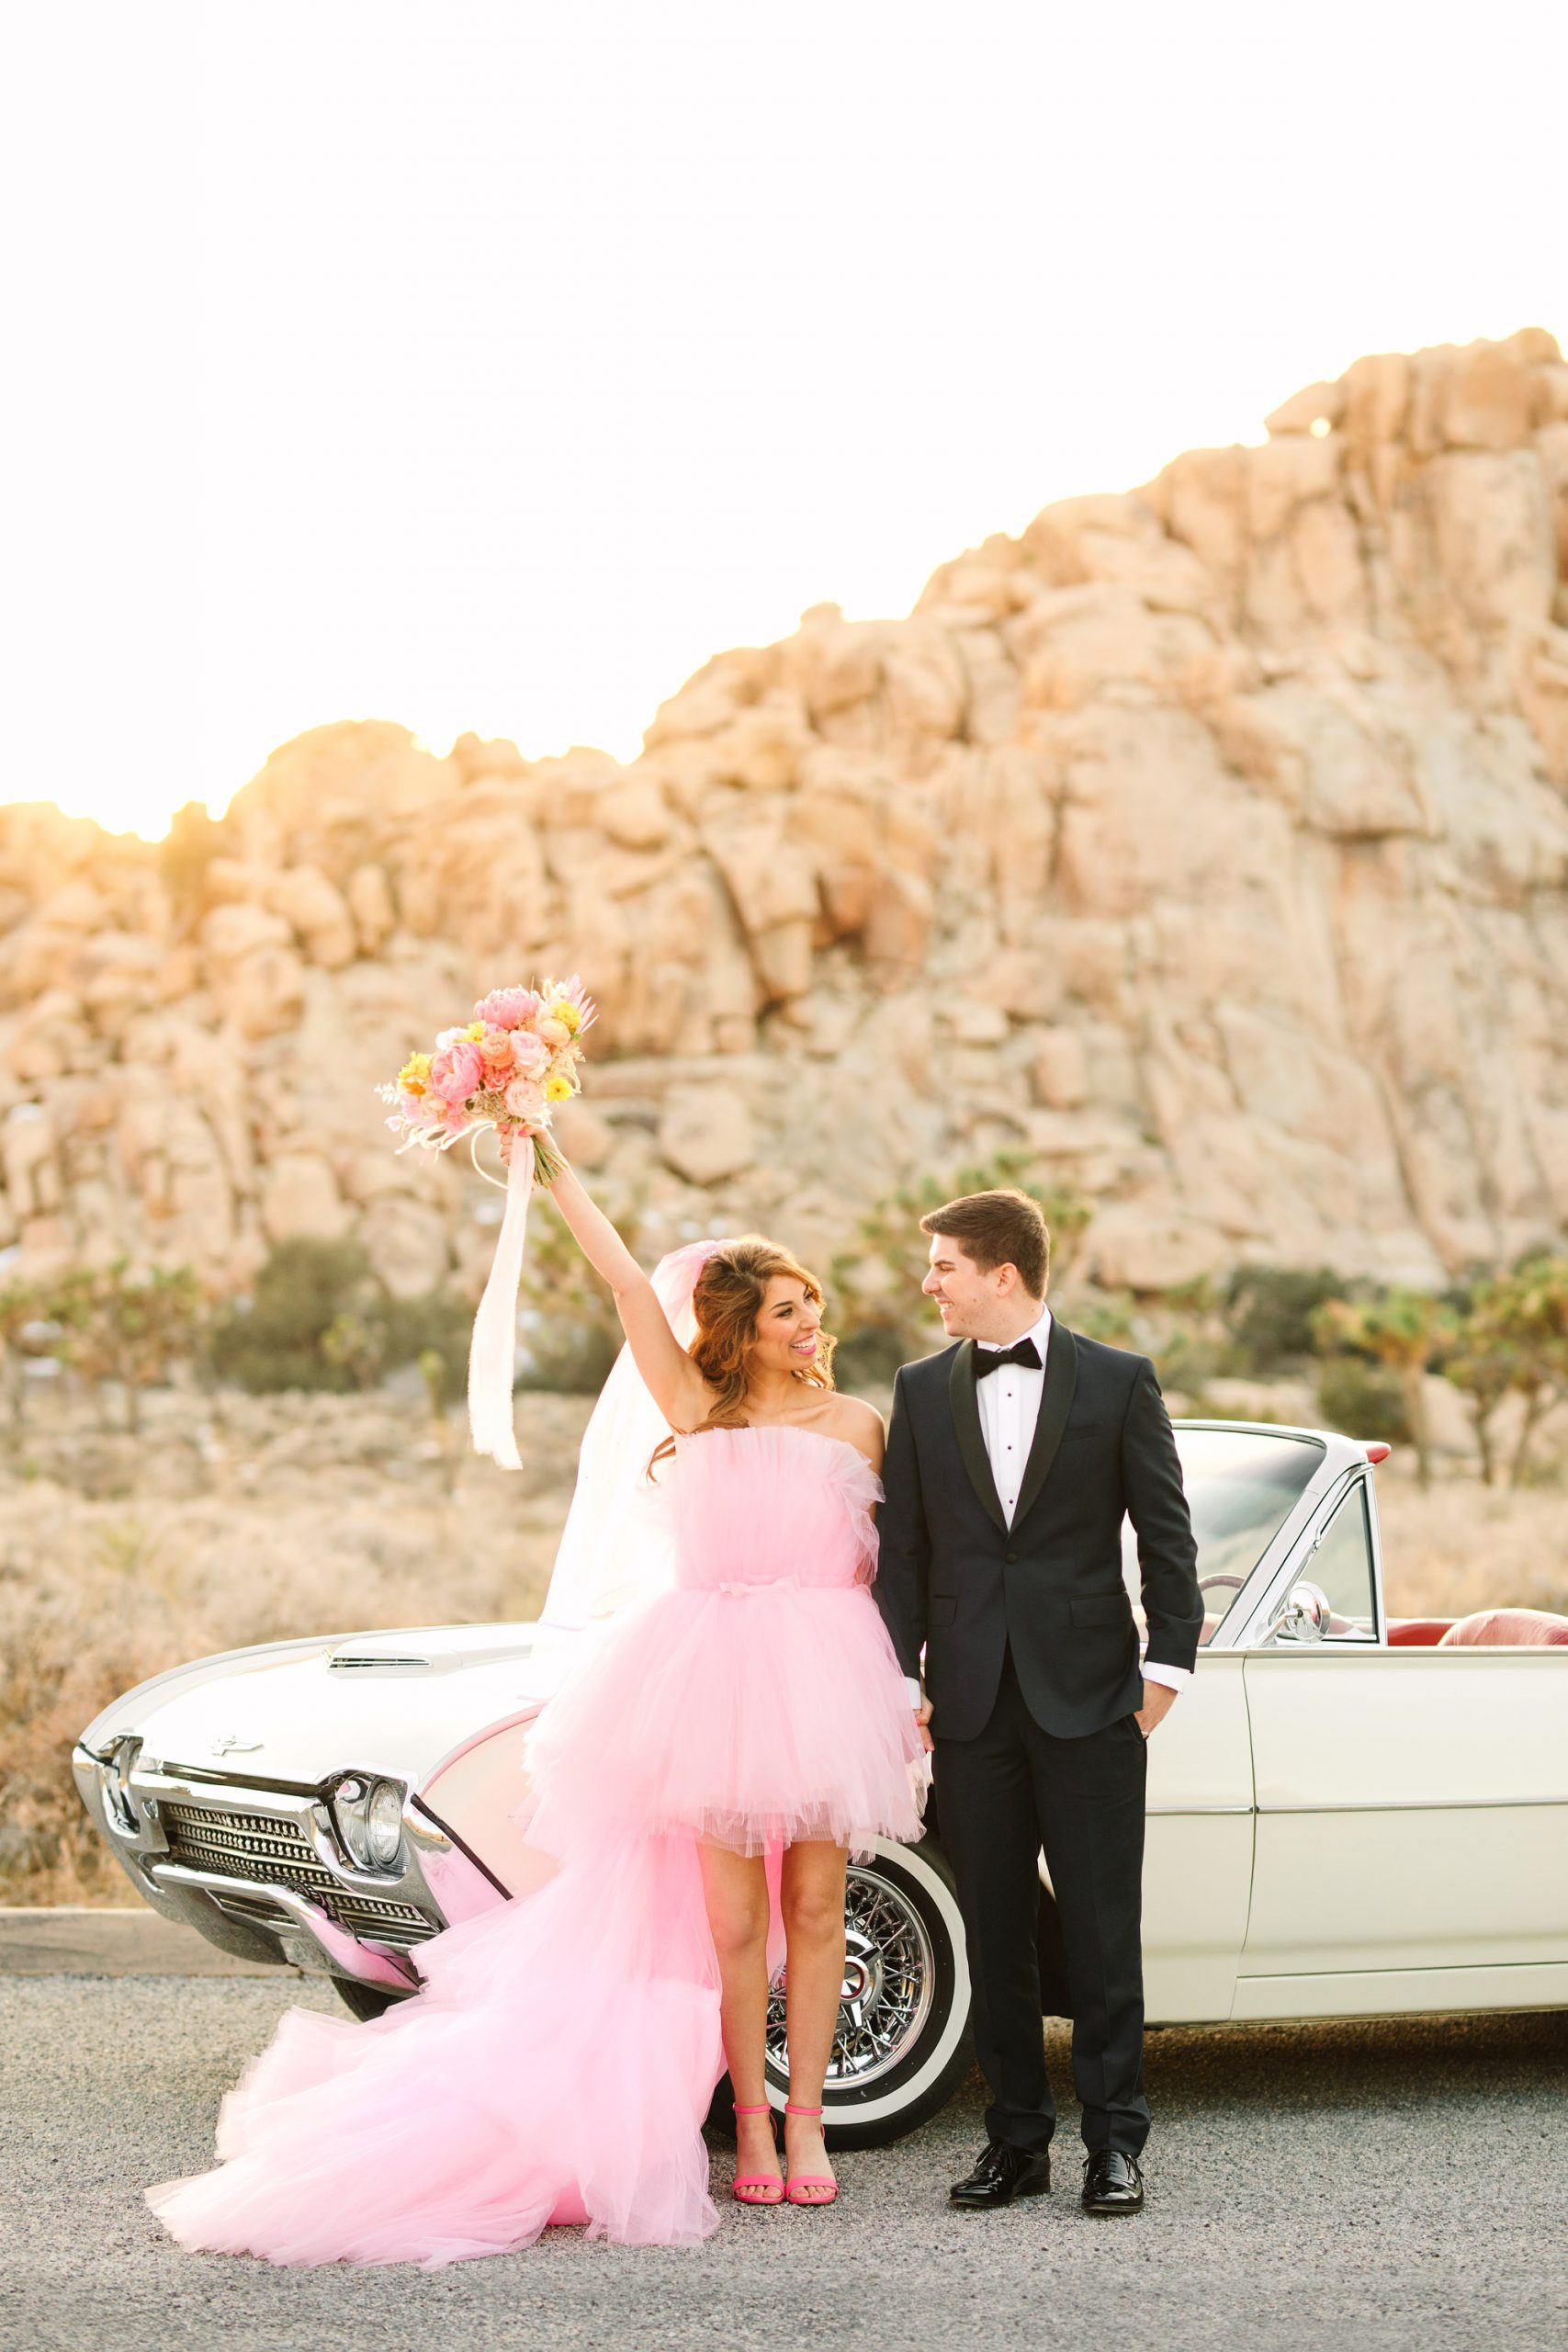 Bride and groom with white classic Ford Thunderbird convertible | Pink wedding dress Joshua Tree elopement featured on Green Wedding Shoes | Colorful desert wedding inspiration for fun-loving couples in Southern California #joshuatreewedding #joshuatreeelopement #pinkwedding #greenweddingshoes Source: Mary Costa Photography | Los Angeles